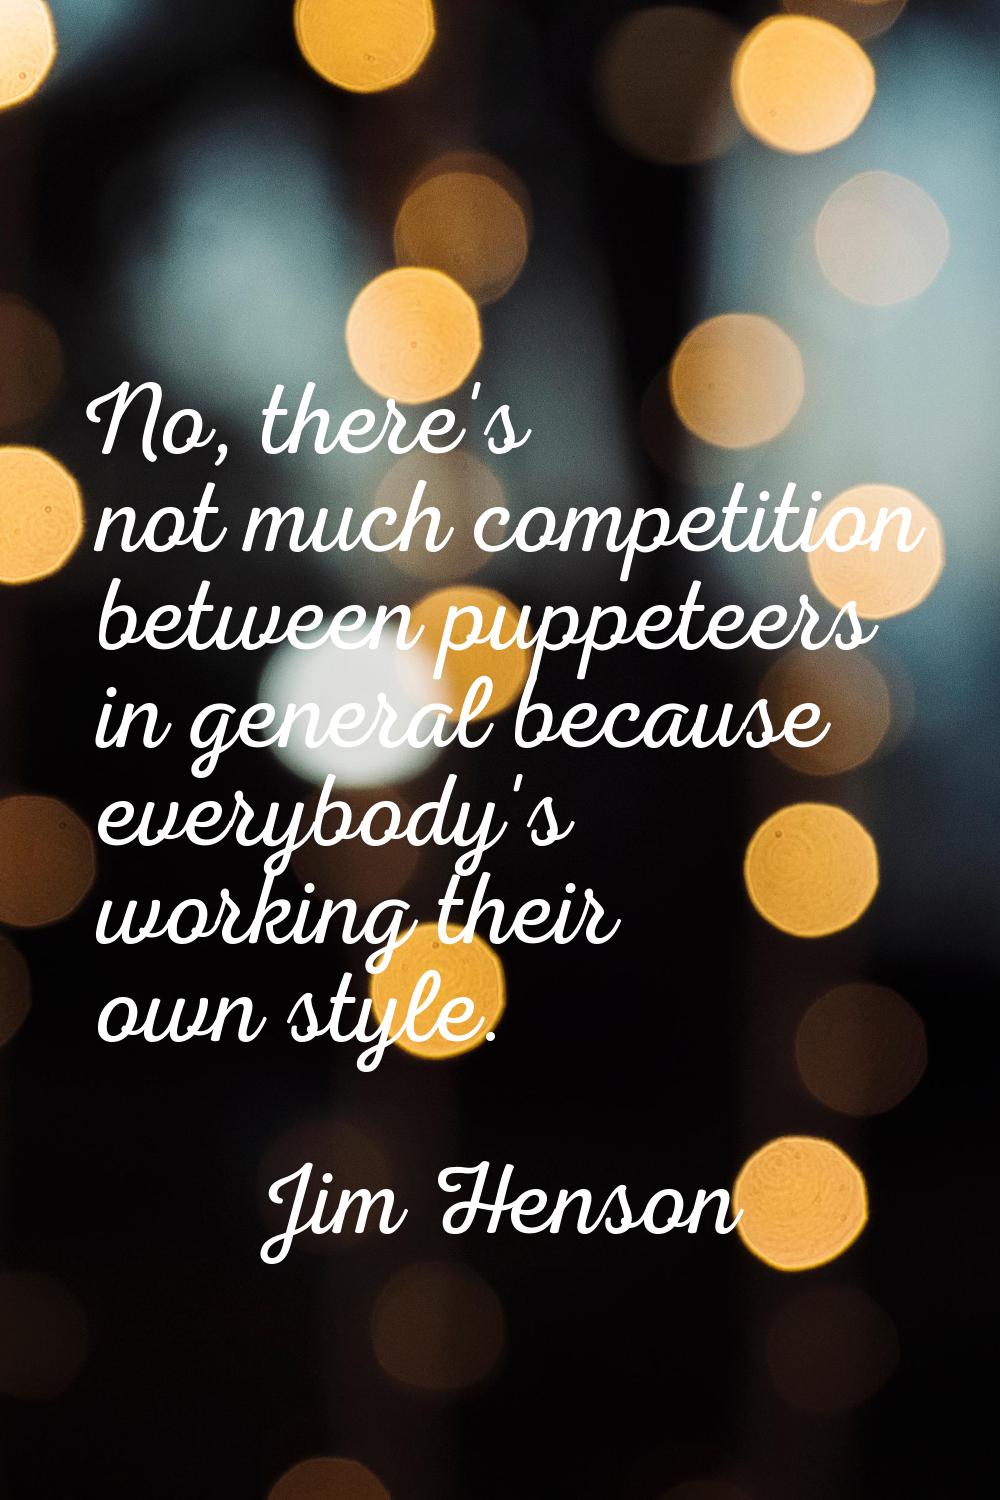 No, there's not much competition between puppeteers in general because everybody's working their ow